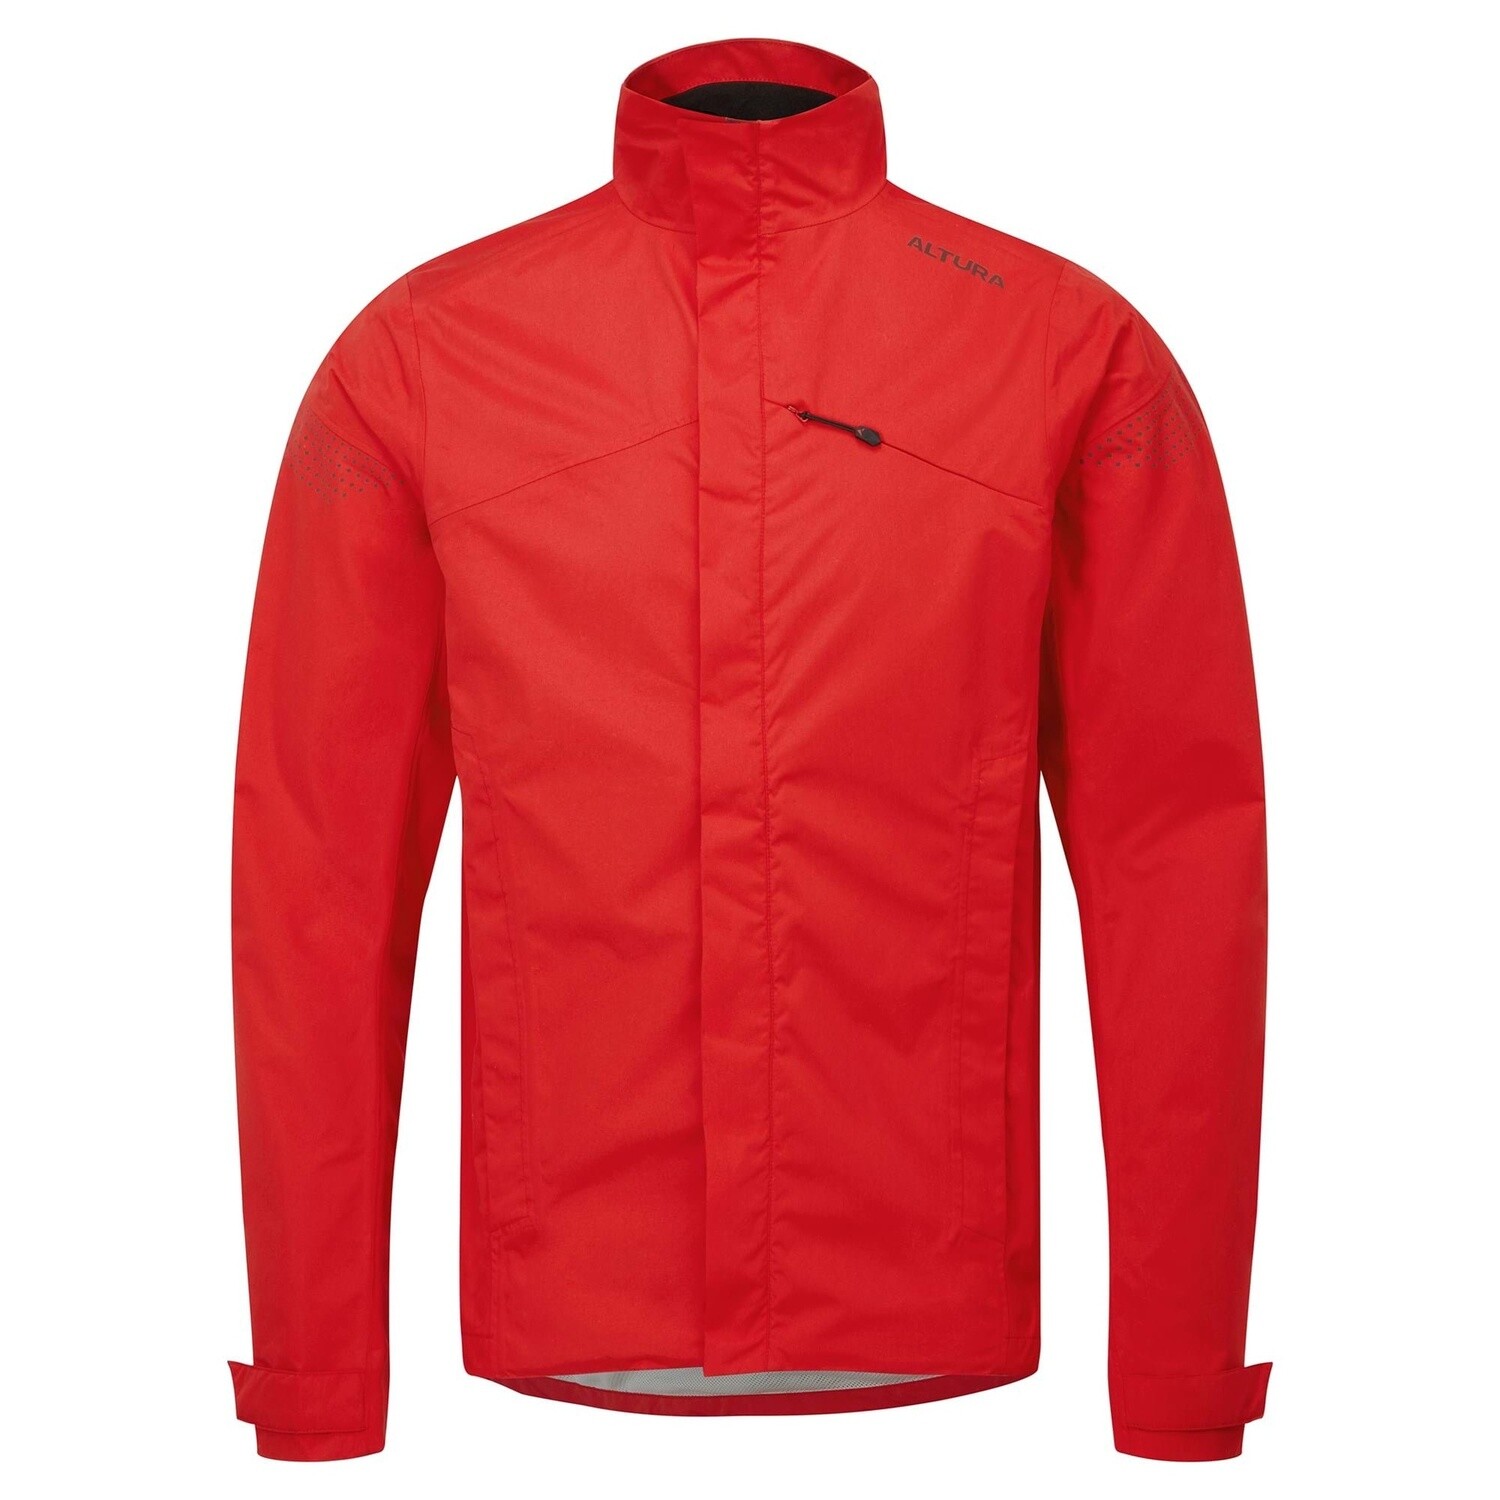 Nevis Waterproof Jacket, Colour: Red, Size: S